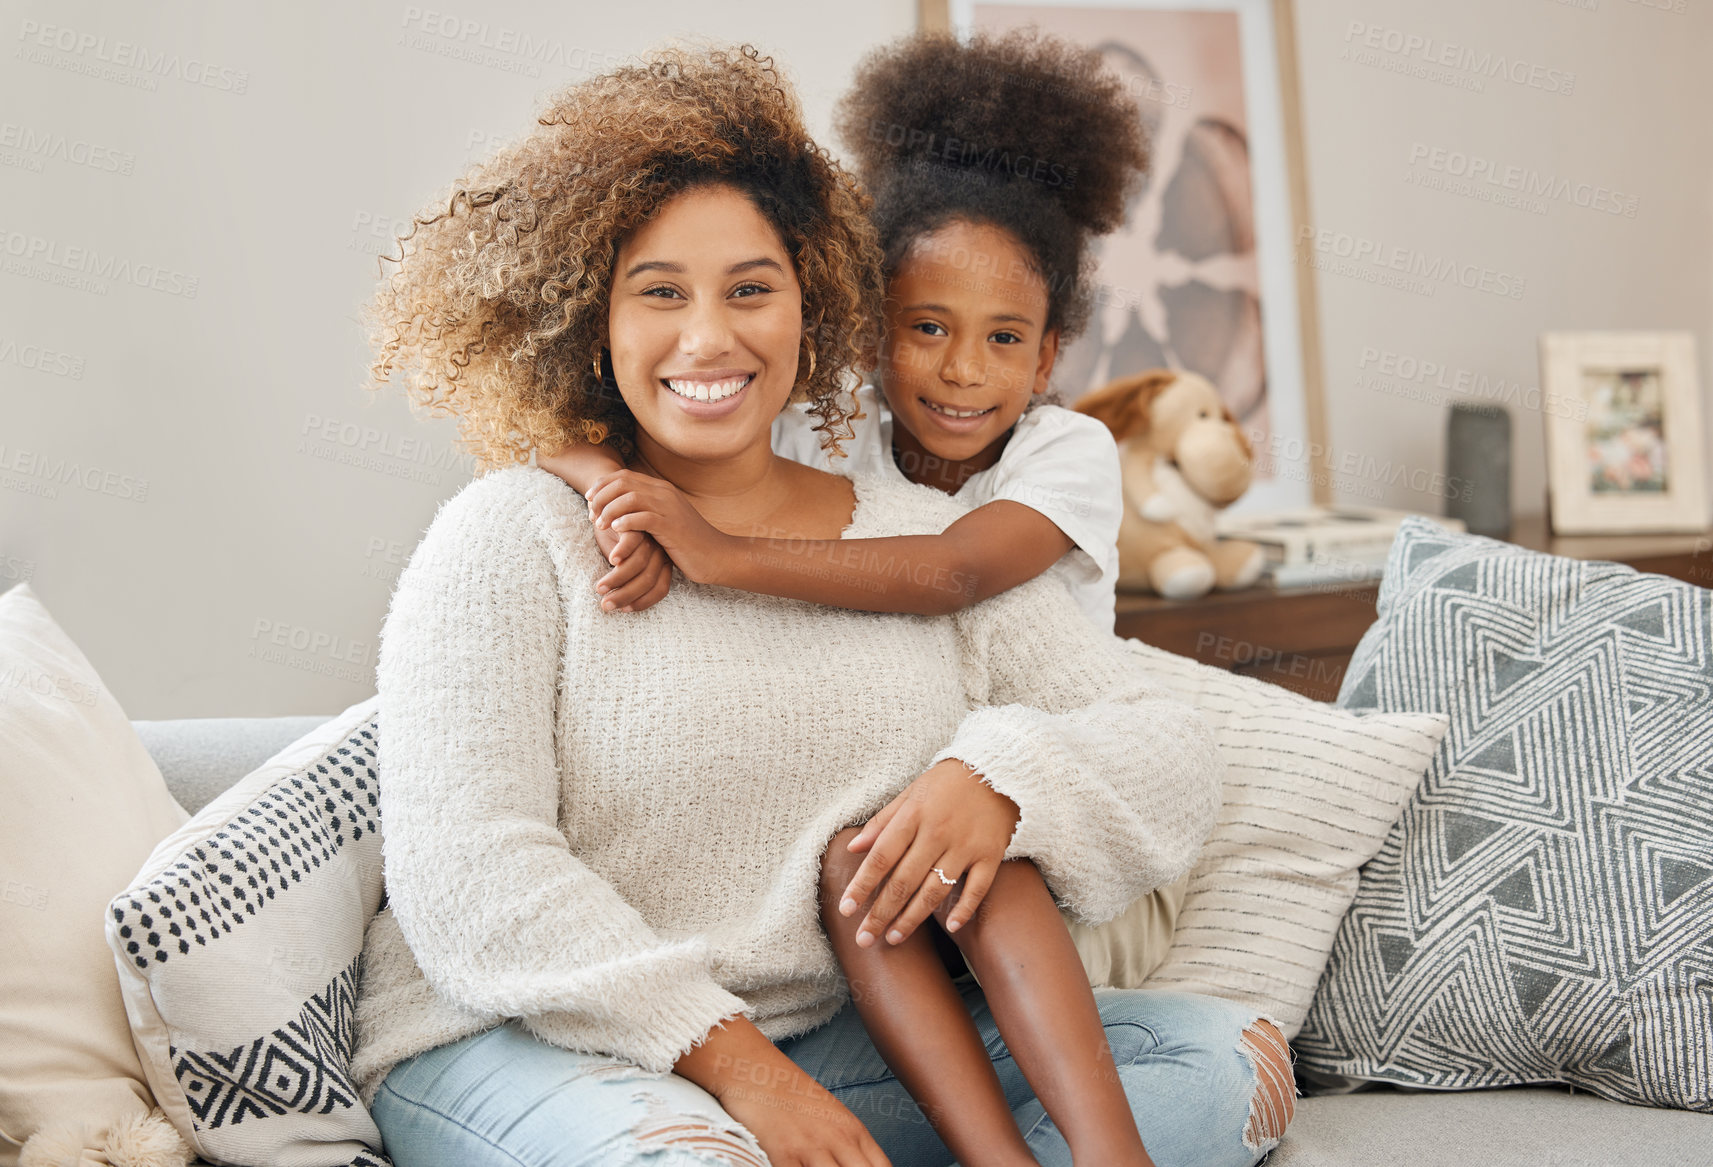 Buy stock photo Shot of a mother and daughter sitting on the couch